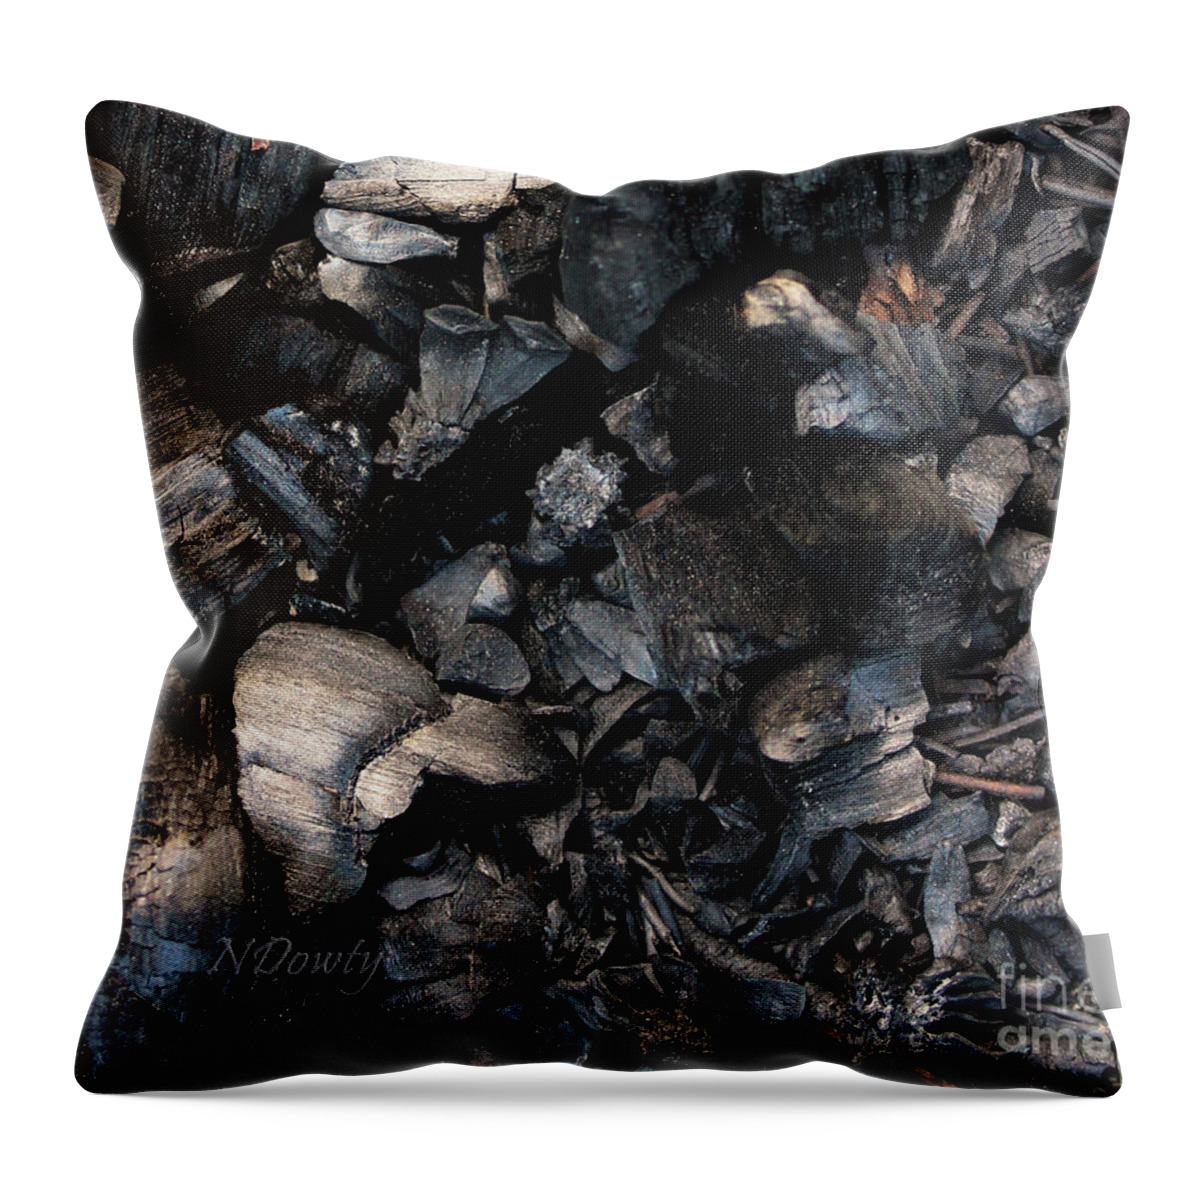 Fire On The Mountain - Pine Cone Cinders Throw Pillow featuring the photograph Pine Cone Cinders by Natalie Dowty